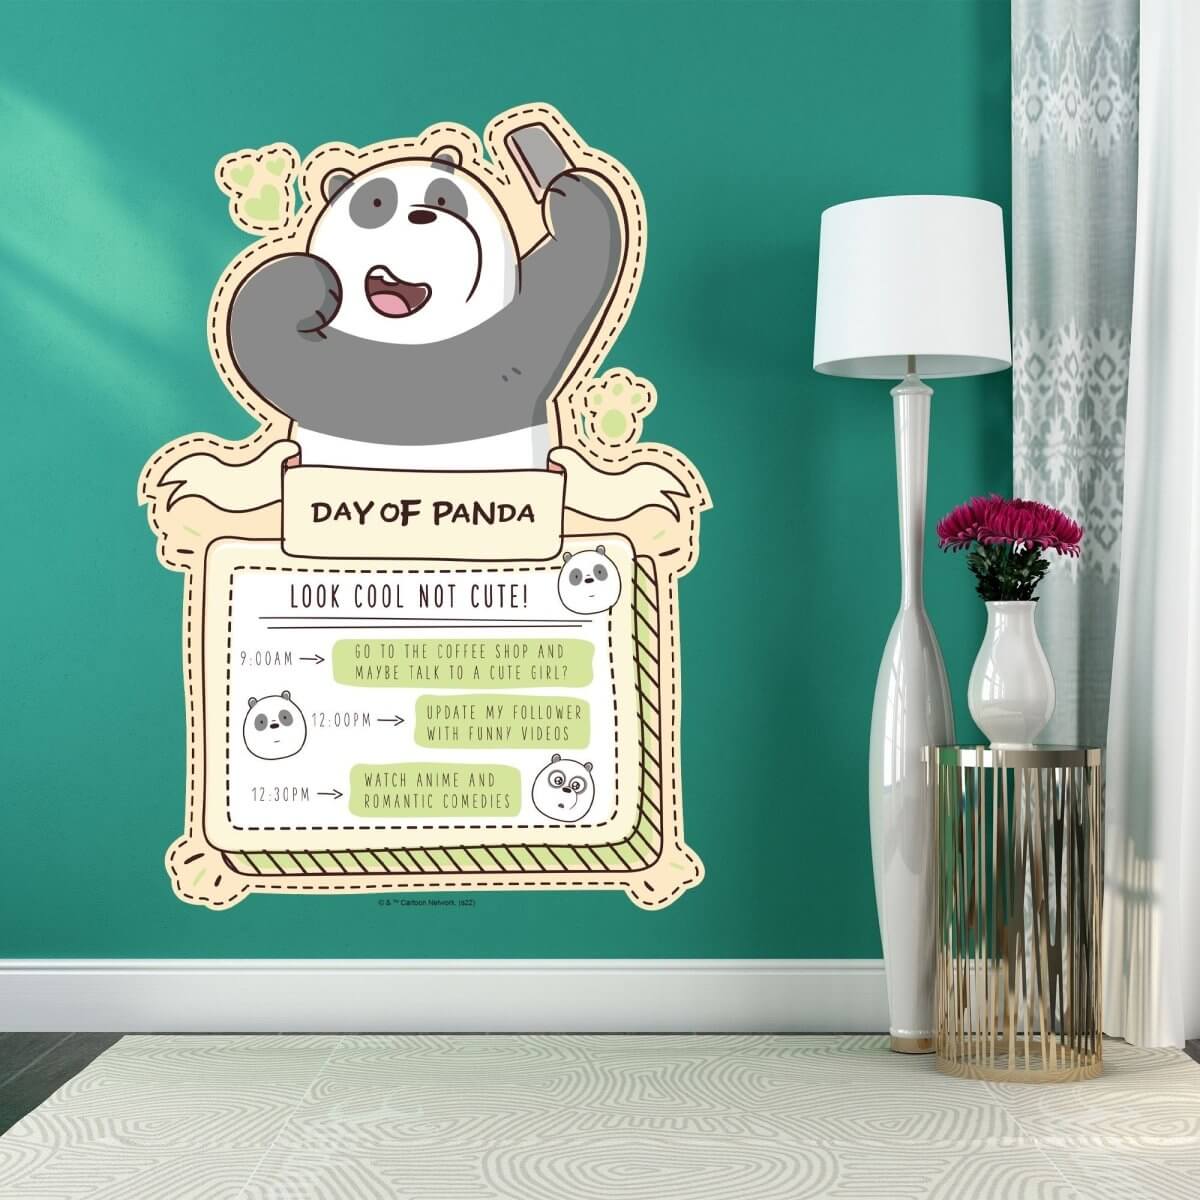 Kismet Decals Home & Room Decor We Bare Bears Panda's Day Wall decal sticker - officially licensed - latex printed with no solvent odor - Kismet Decals